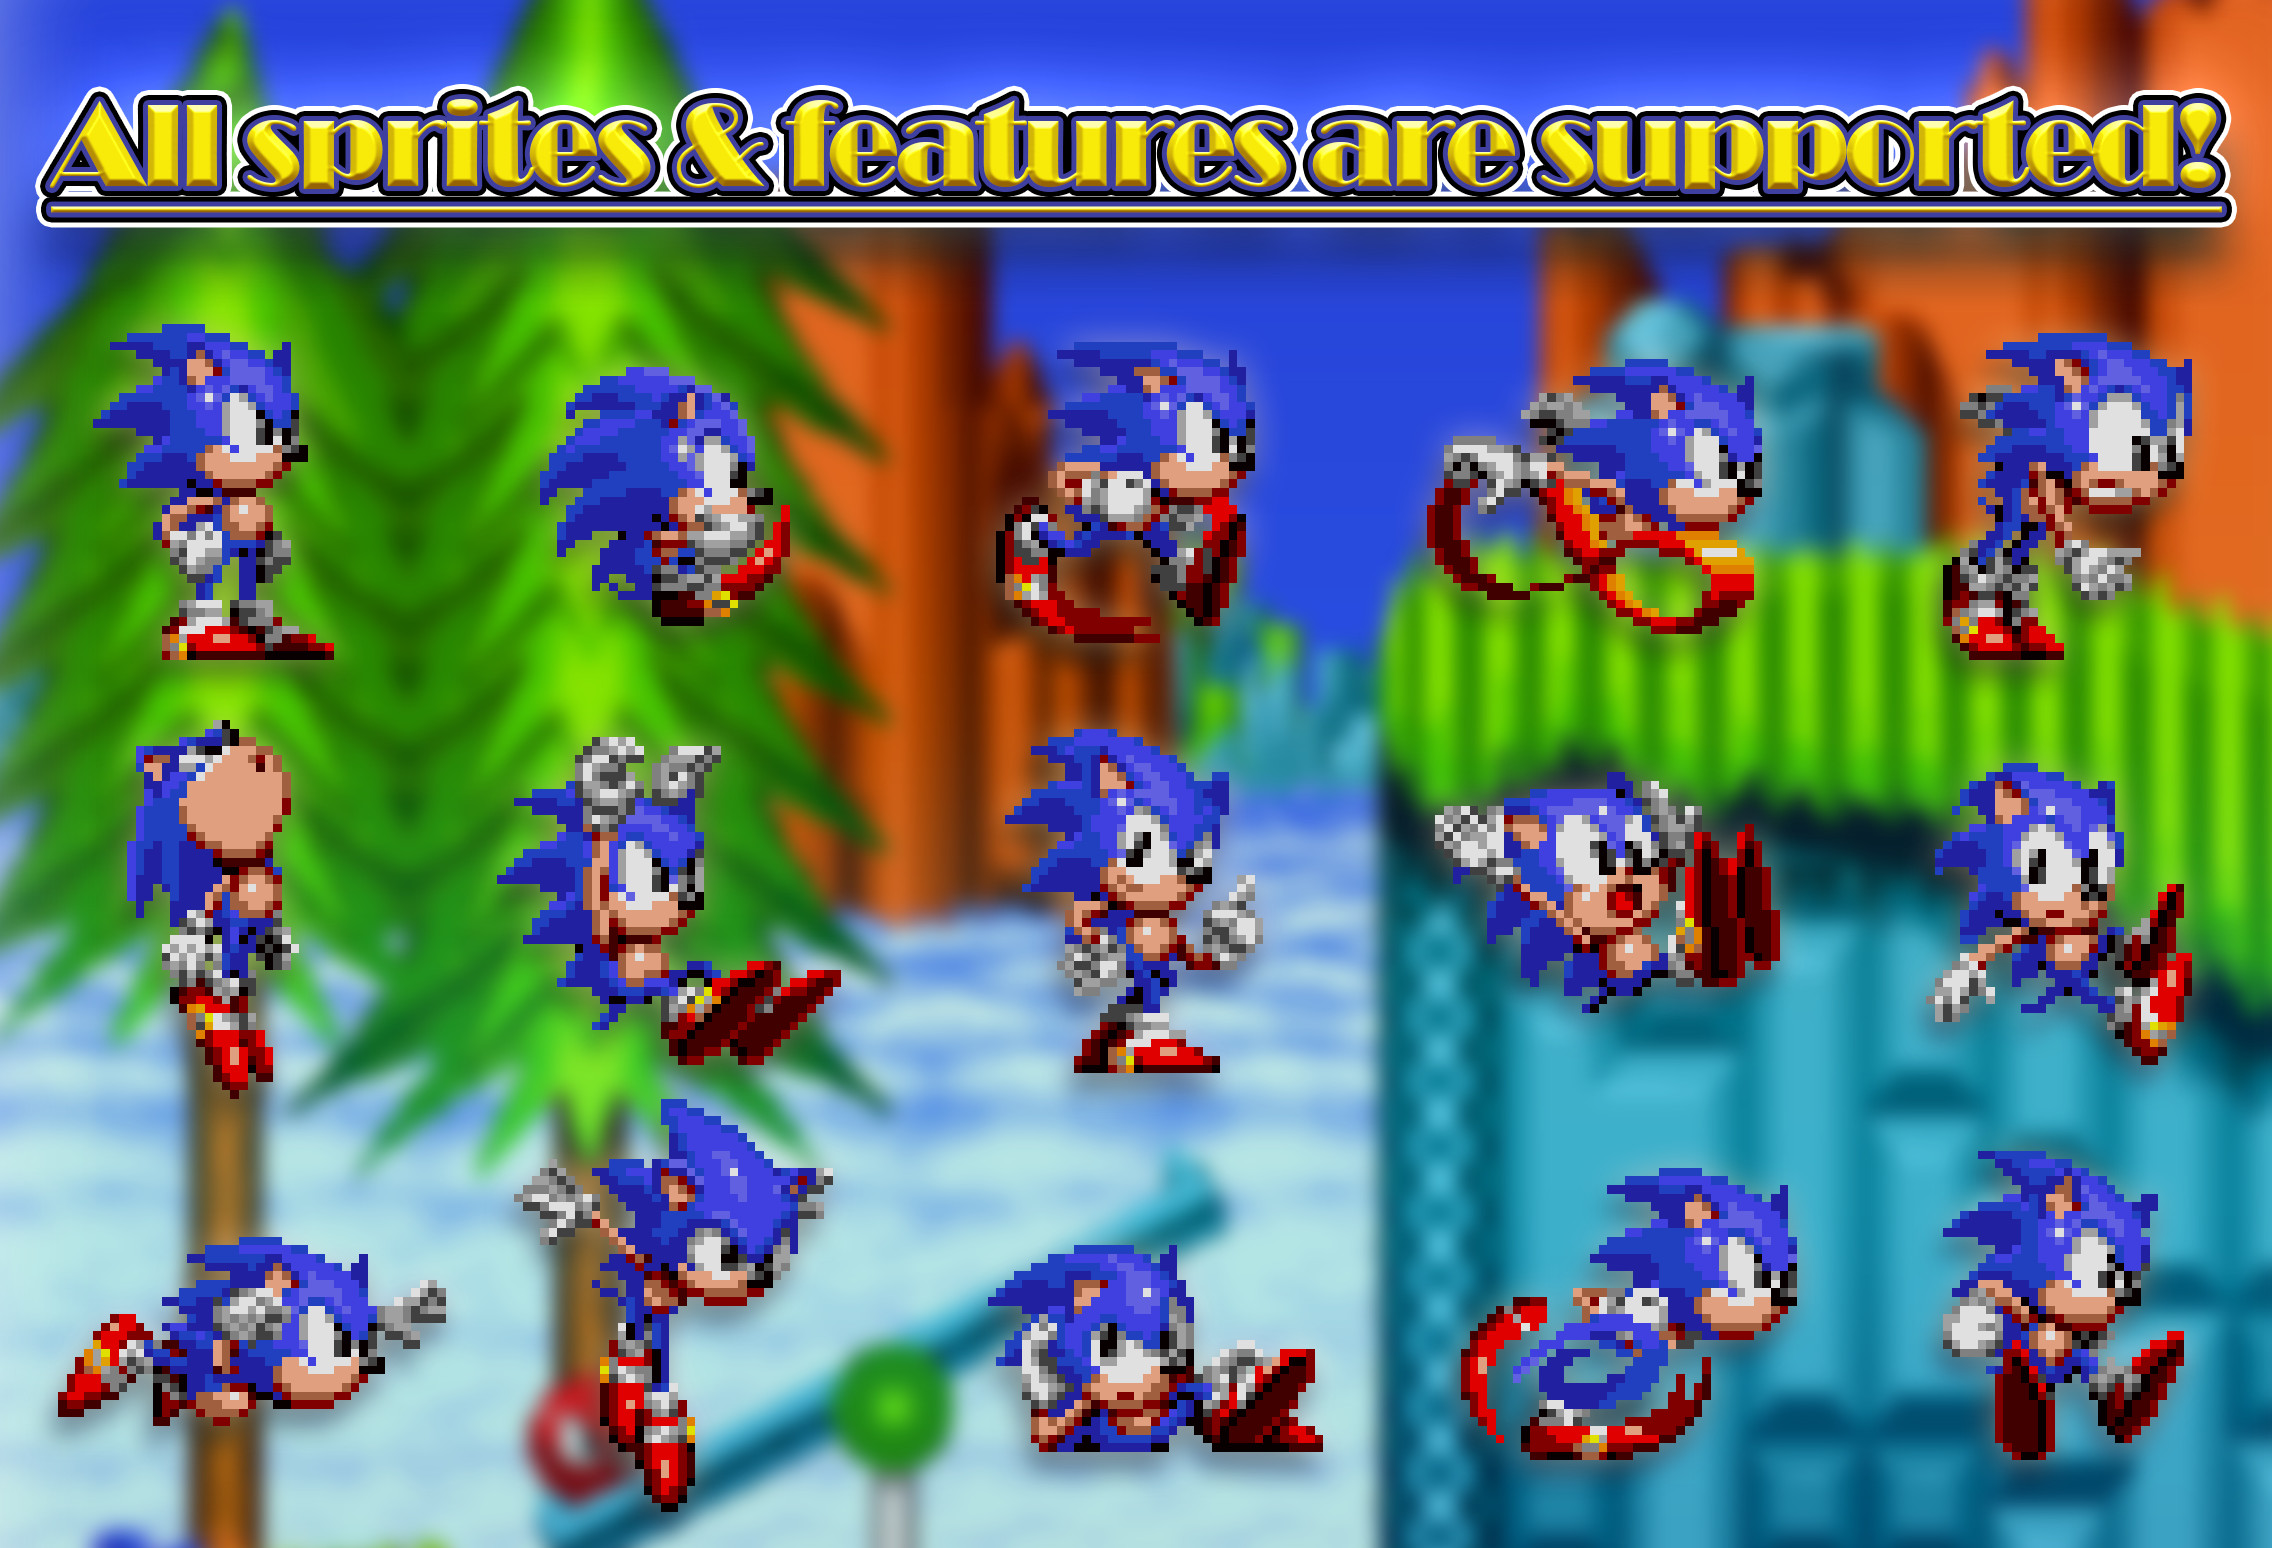 Sonic 2 Absolute